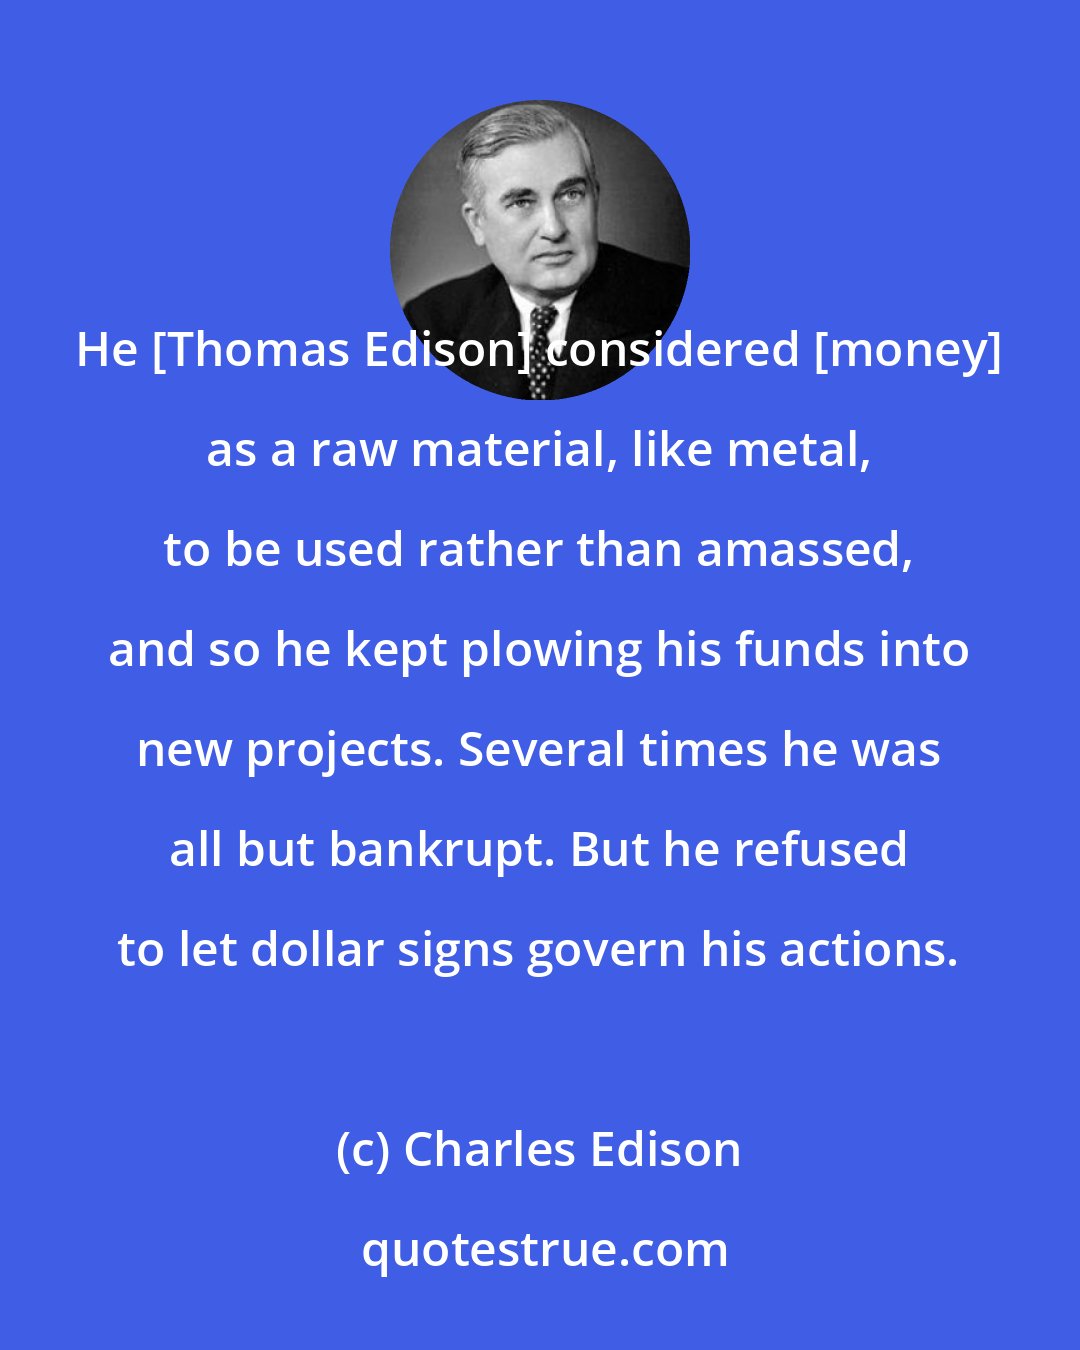 Charles Edison: He [Thomas Edison] considered [money] as a raw material, like metal, to be used rather than amassed, and so he kept plowing his funds into new projects. Several times he was all but bankrupt. But he refused to let dollar signs govern his actions.